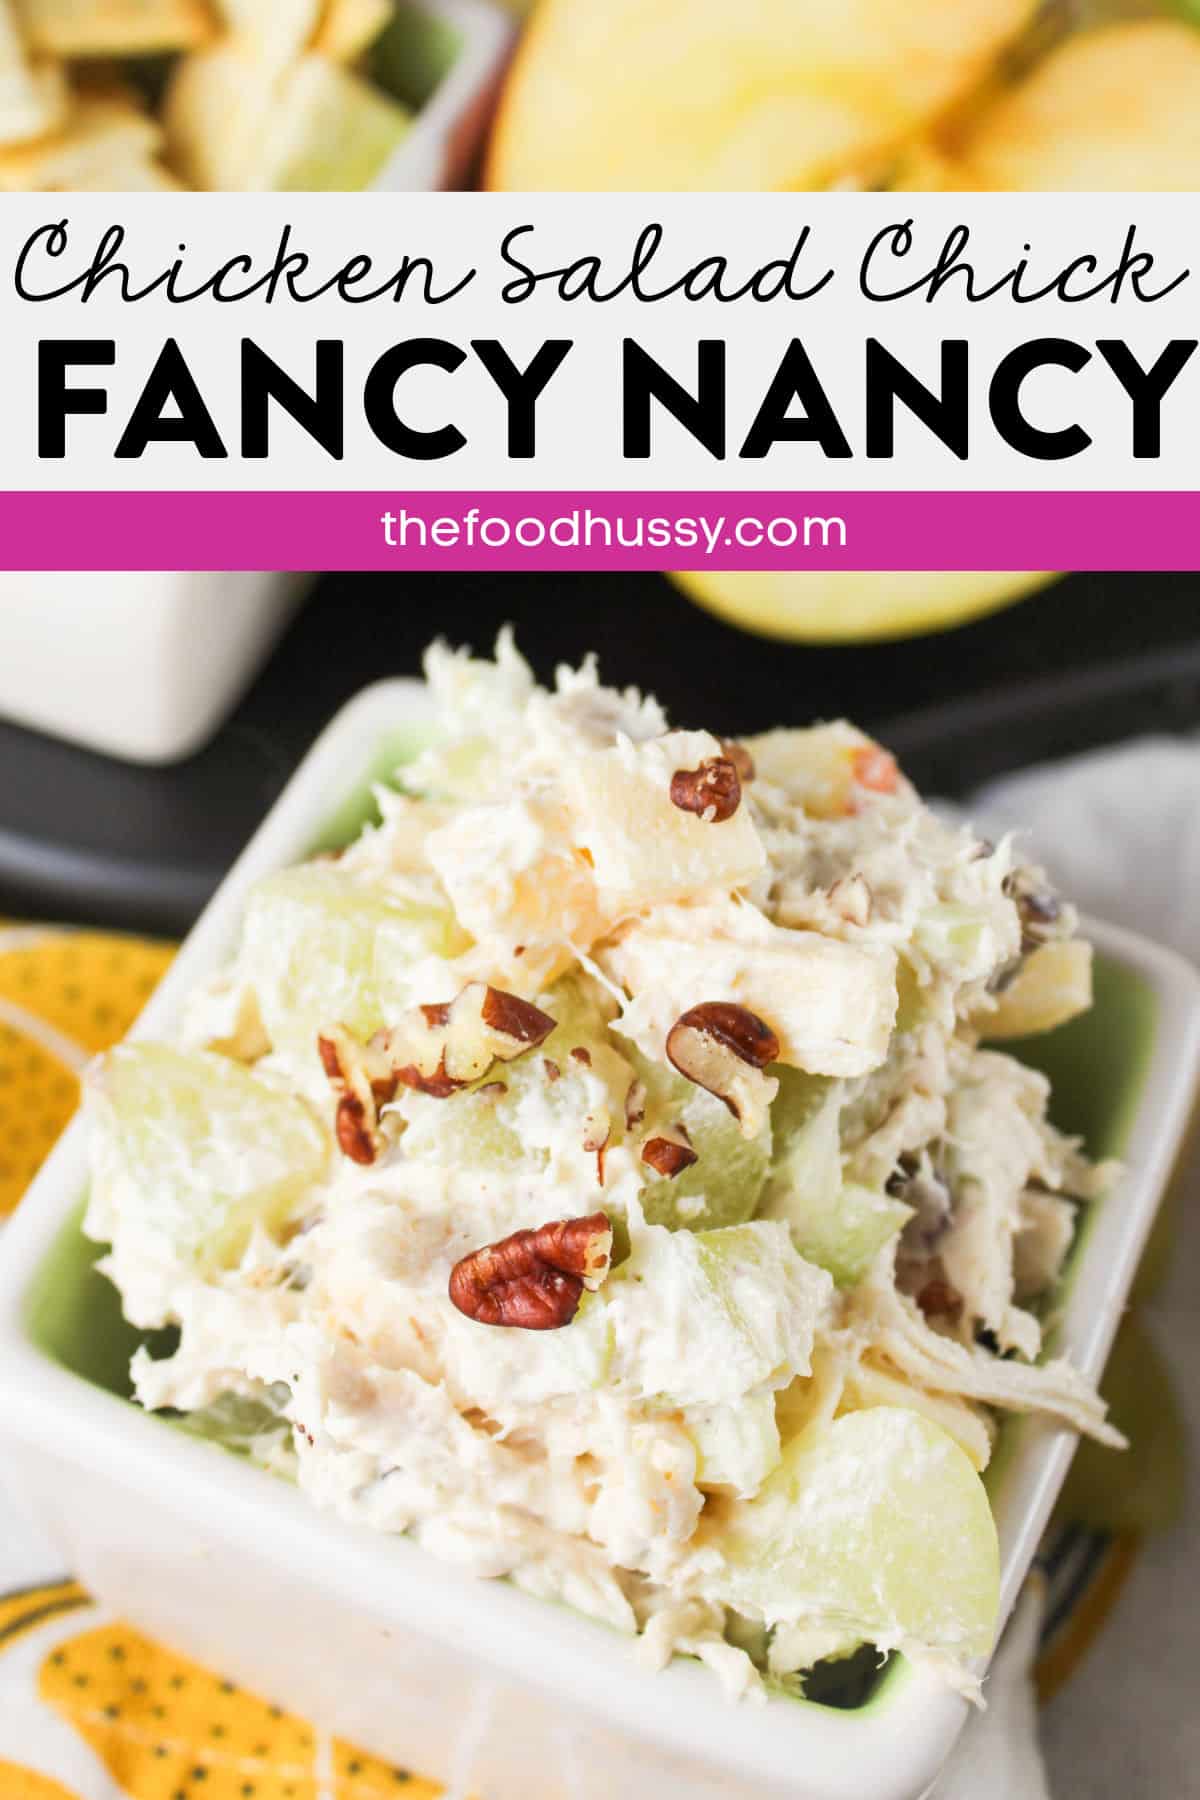 The Fancy Nancy Chicken Salad is perfect for lunch, brunch or any potluck! It combines the traditional Chicken Salad Chick Classic Carol with crisp grapes, sweet Fuji apples and crunchy pecans! via @foodhussy